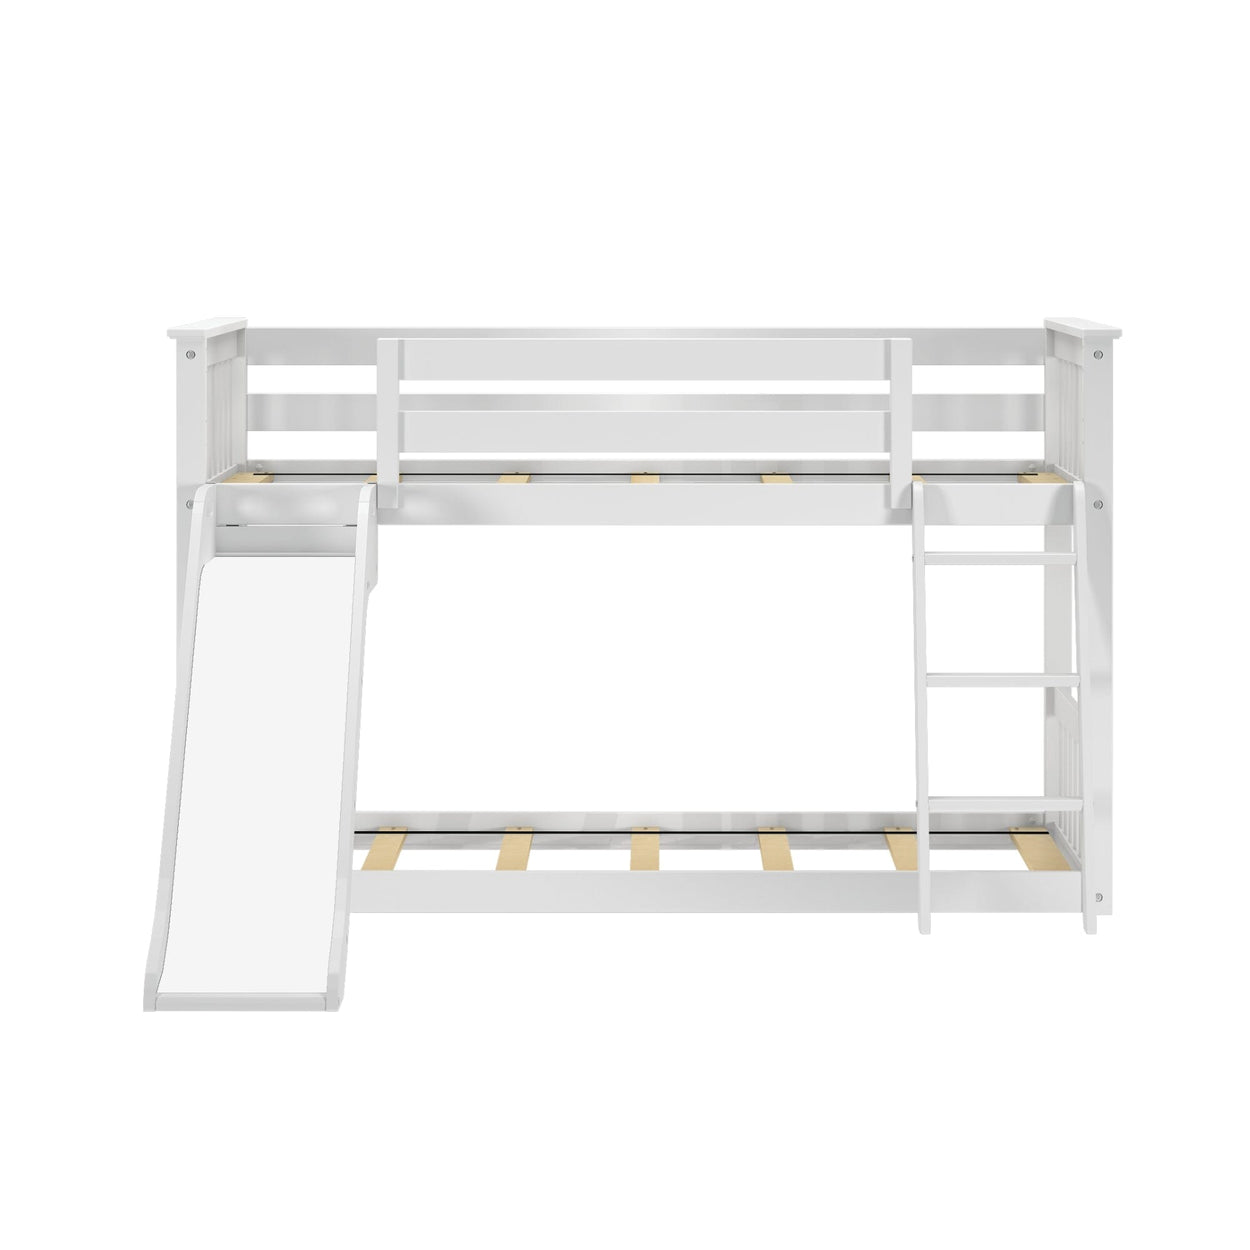 180417002067 : Bunk Beds Low Bunk with Easy Slide and Orange Camper Van Curtain, White